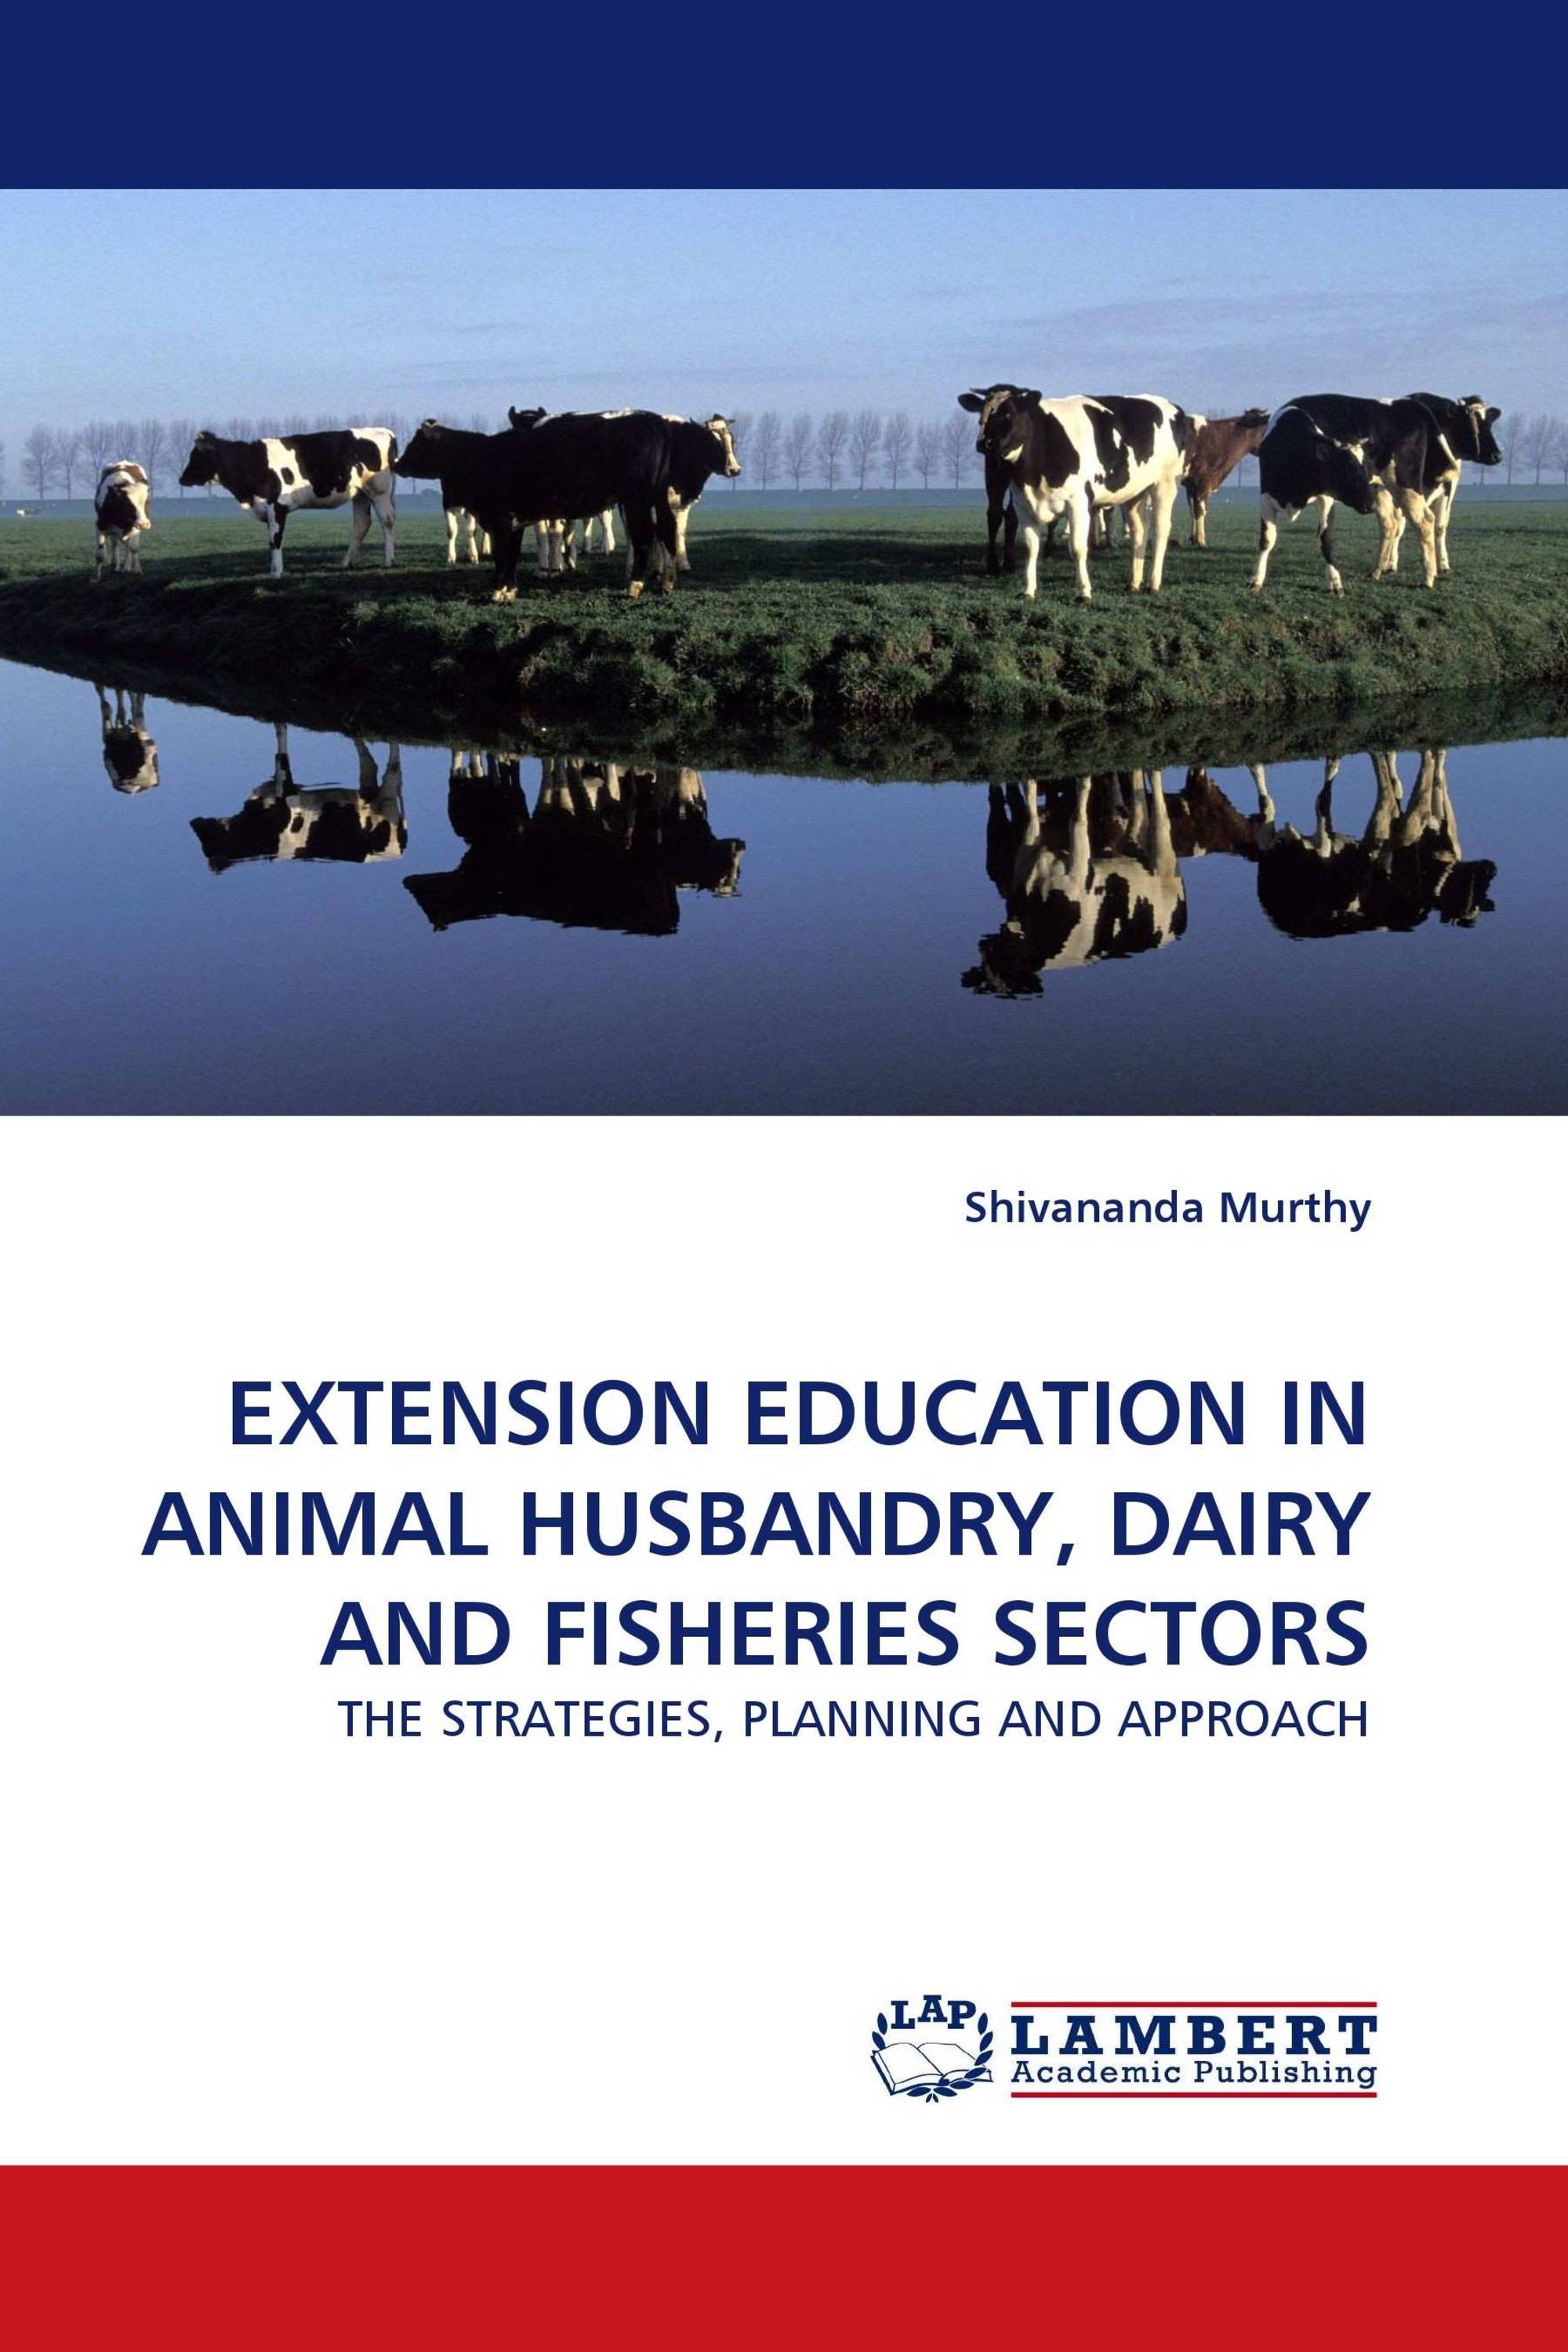 EXTENSION EDUCATION IN ANIMAL HUSBANDRY, DAIRY AND FISHERIES SECTORS /  978-3-8433-8106-2 / 9783843381062 / 3843381062